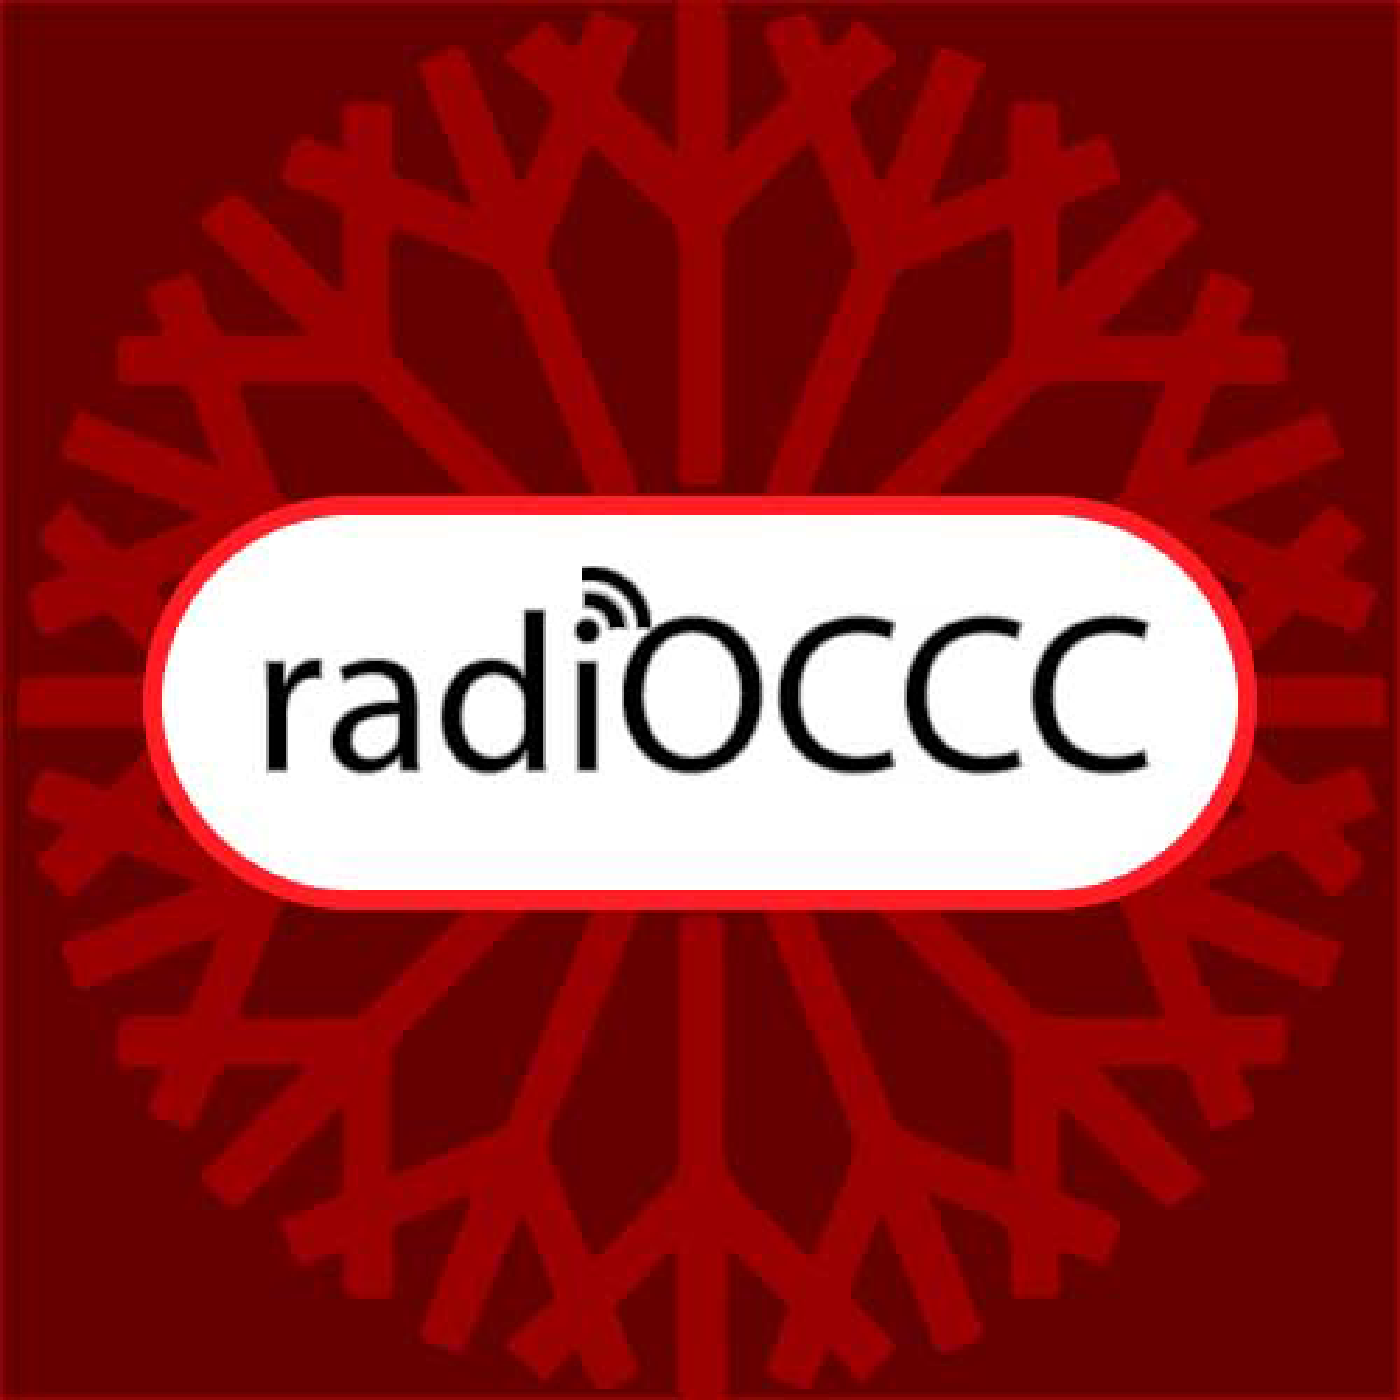 News with RadiOCCC